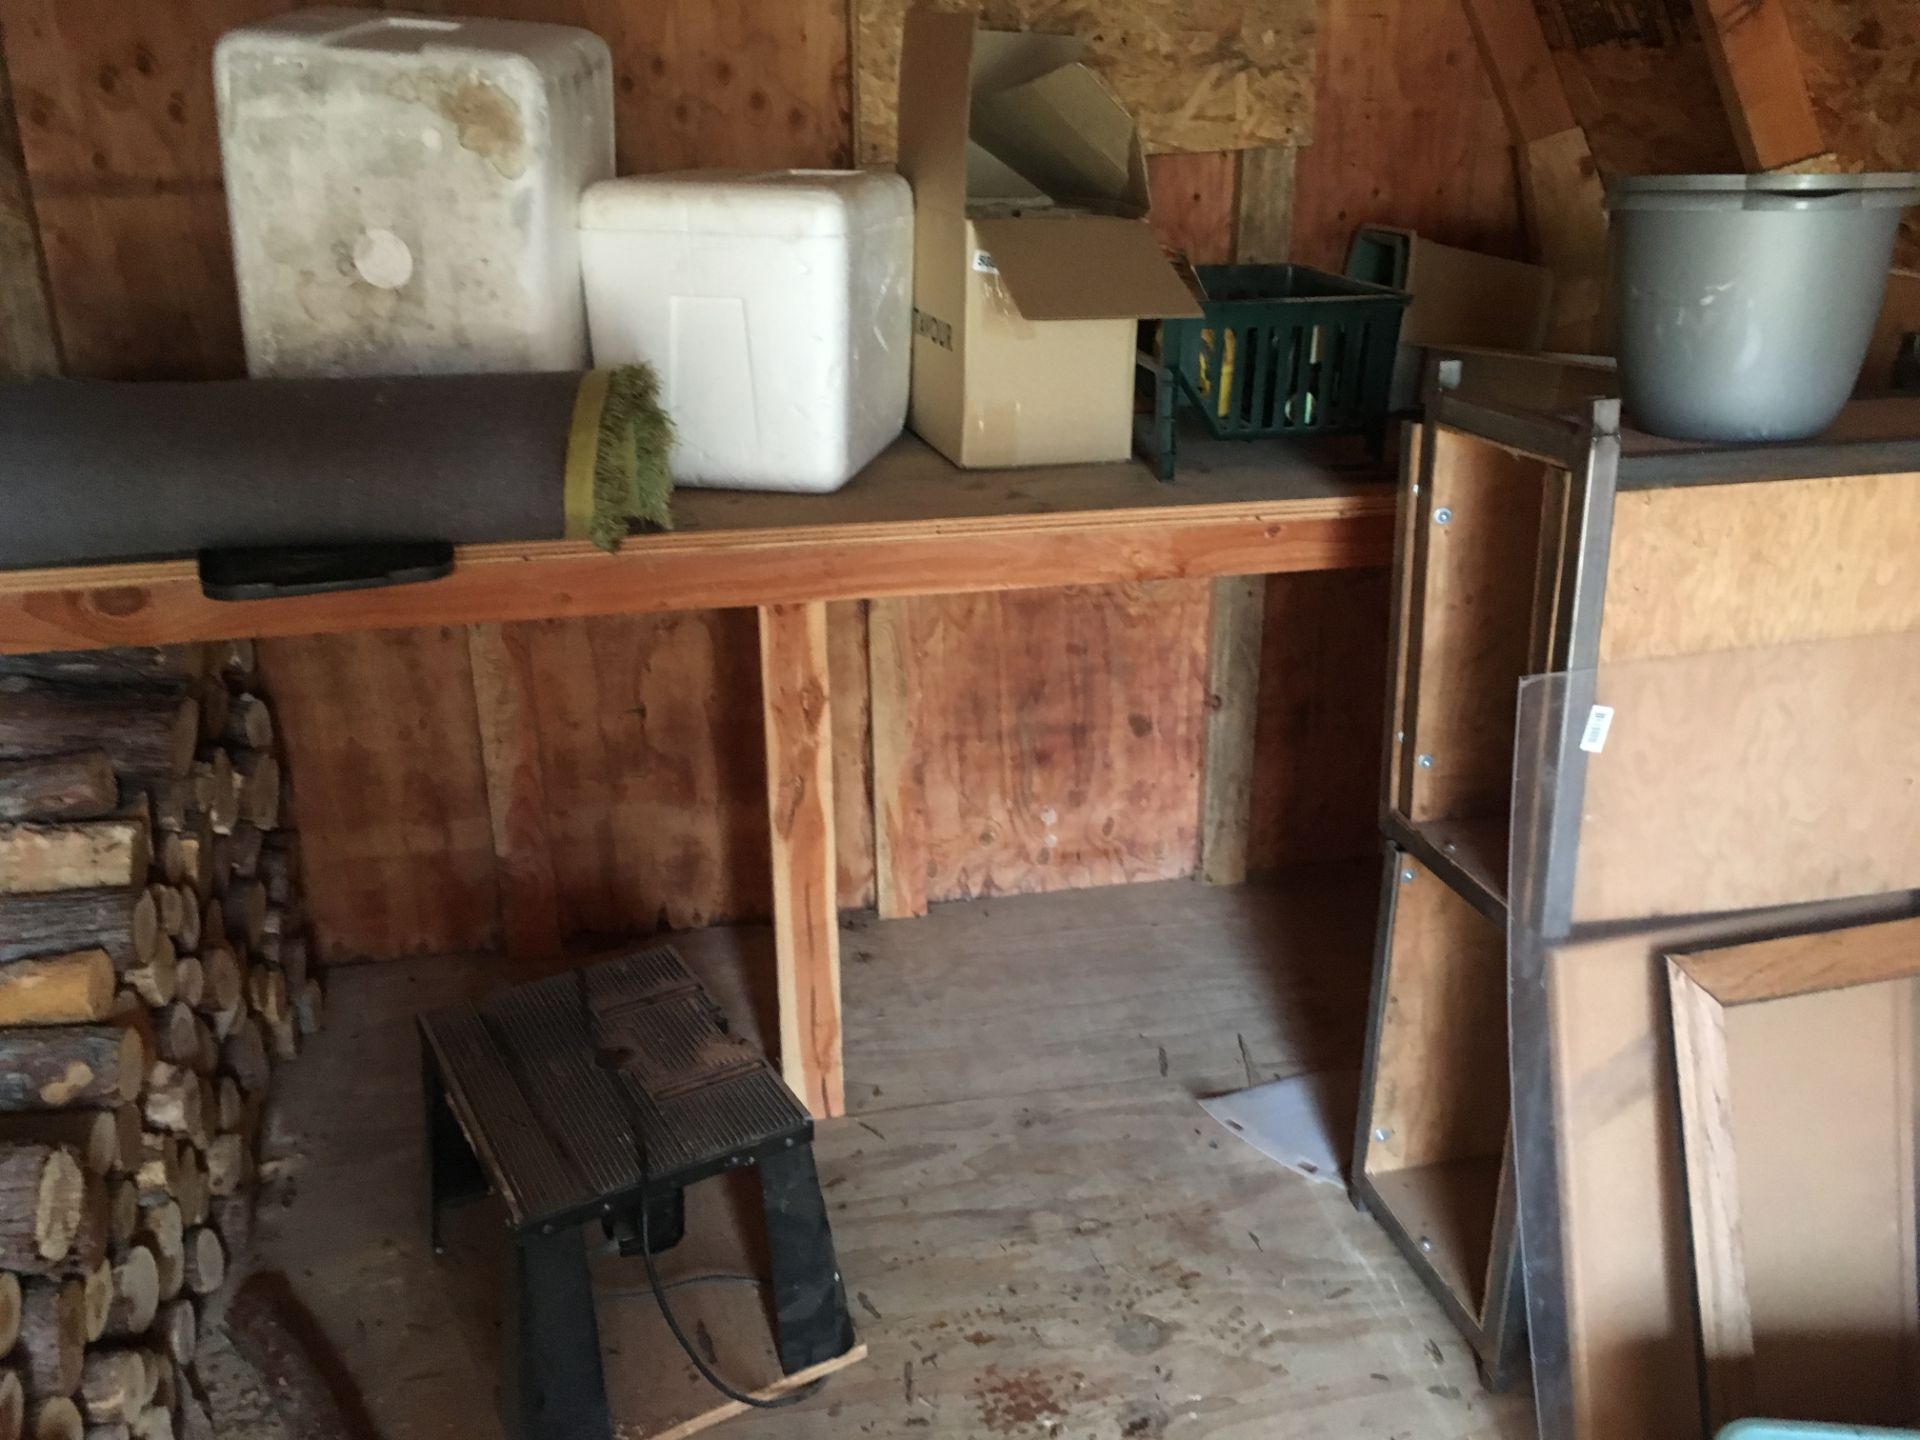 Contents inside shed including Juniper log stock, router table etc. - Image 2 of 2